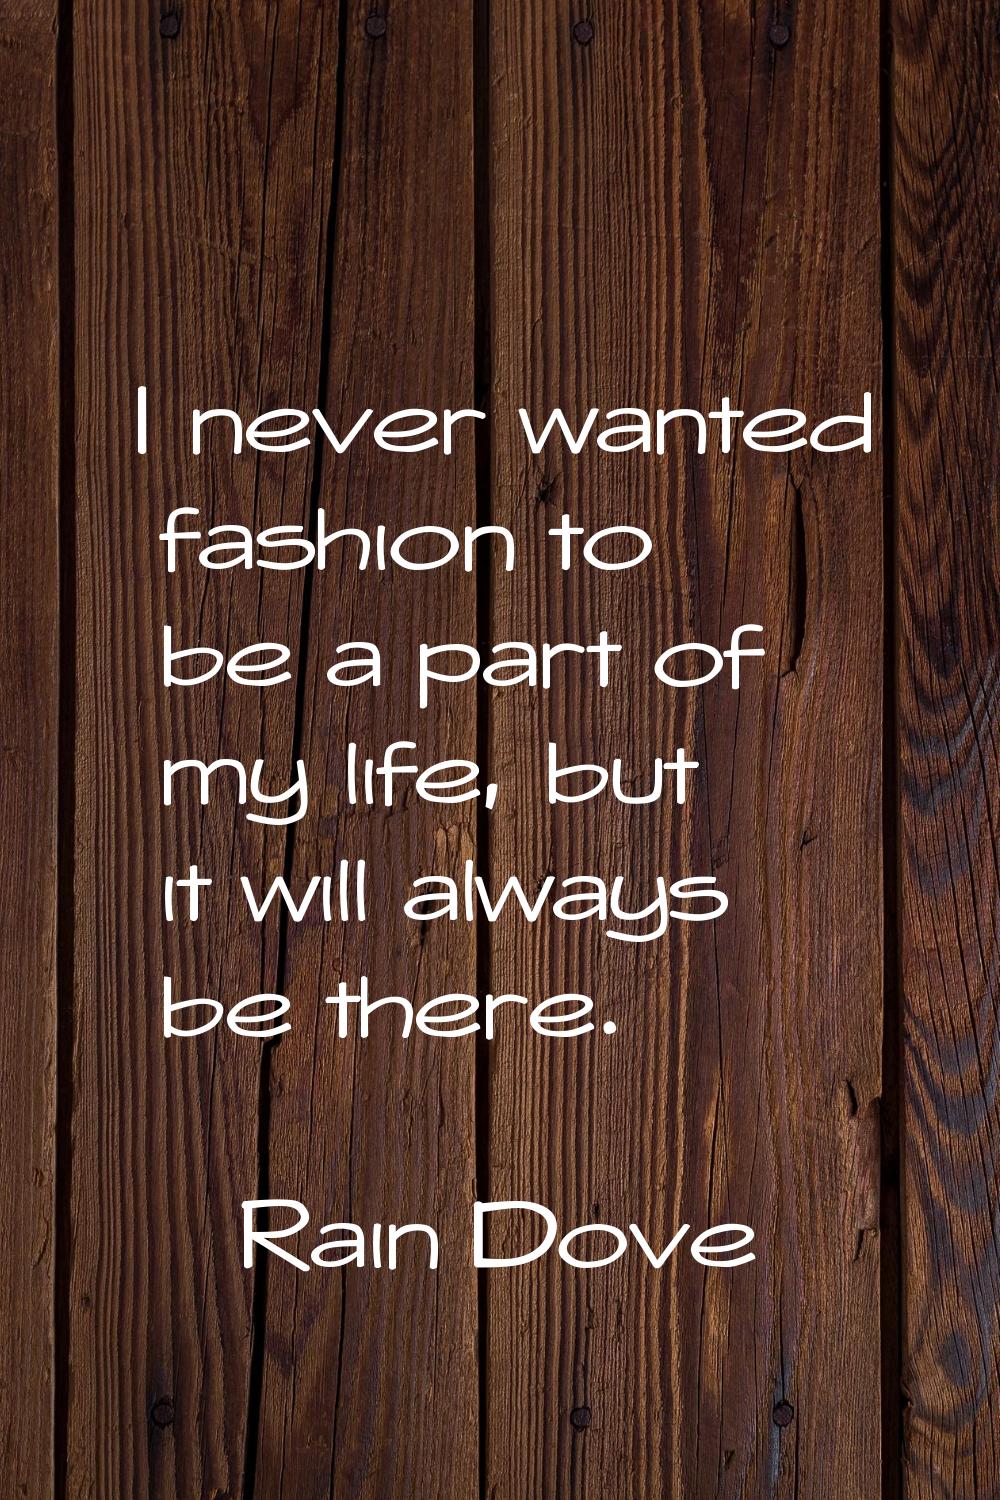 I never wanted fashion to be a part of my life, but it will always be there.